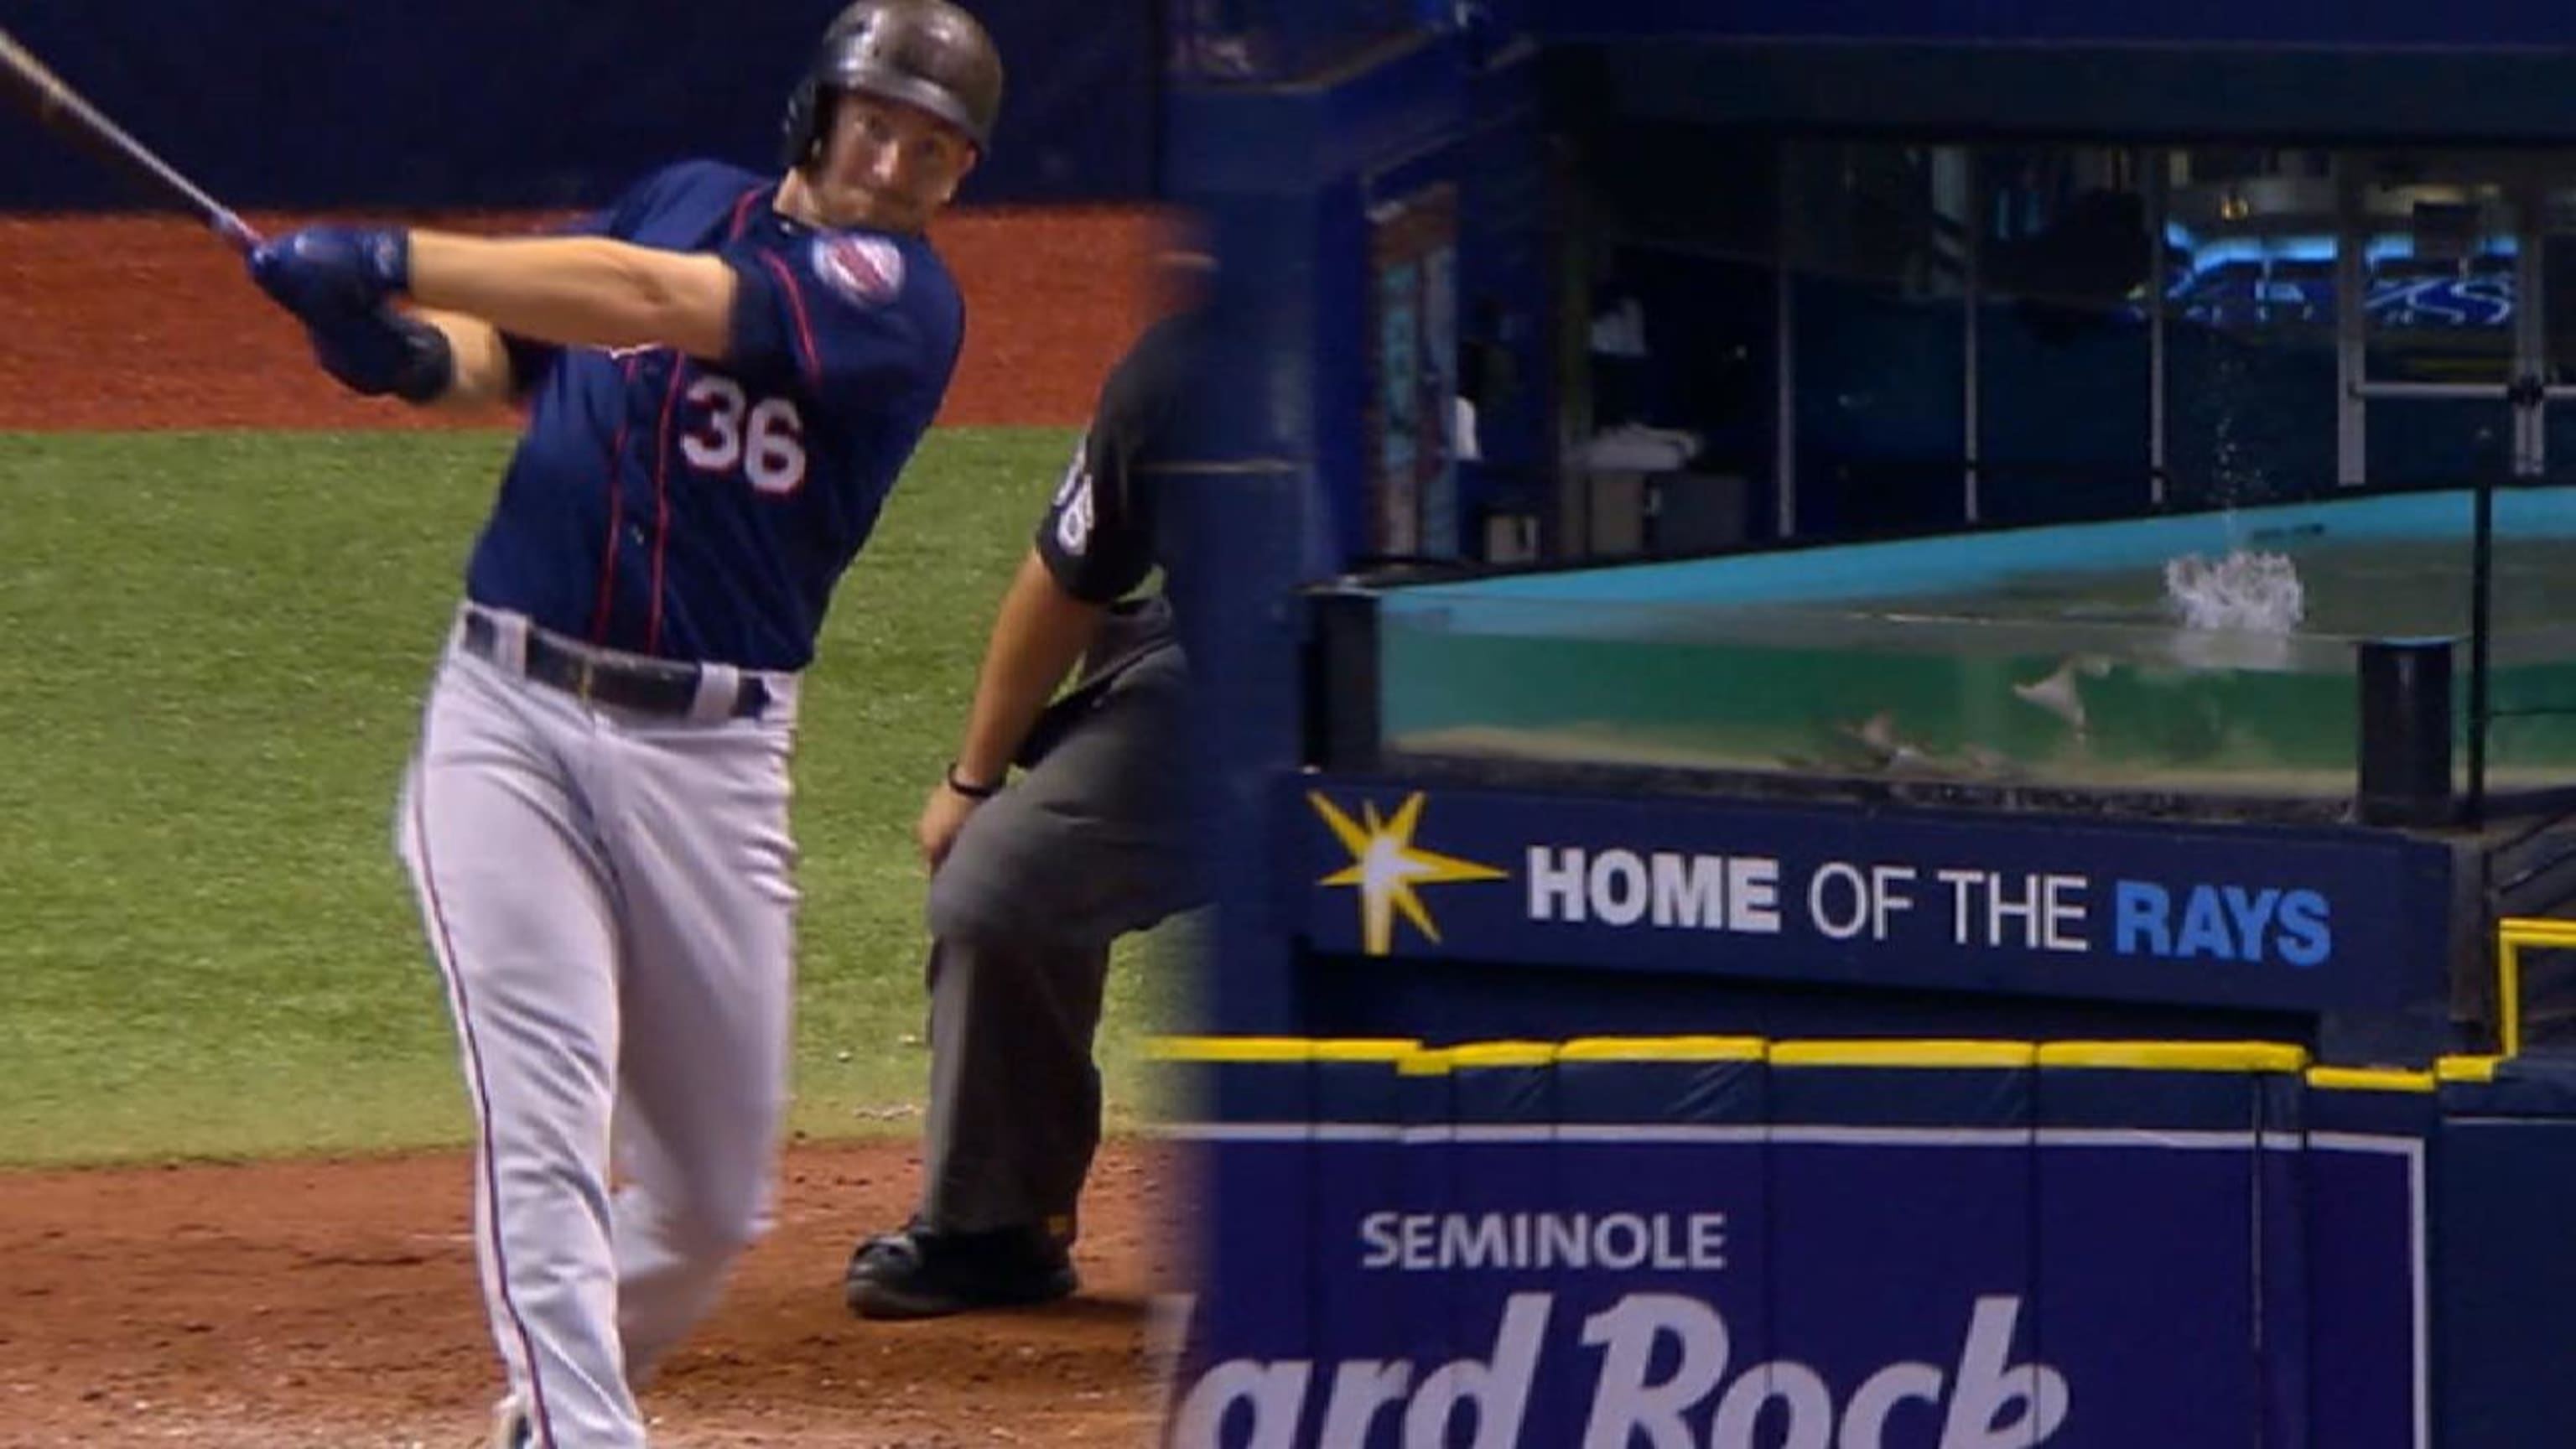 Robbie Grossman crushed a homer that splash-landed in the Rays' Touch Tank  at Tropicana Field